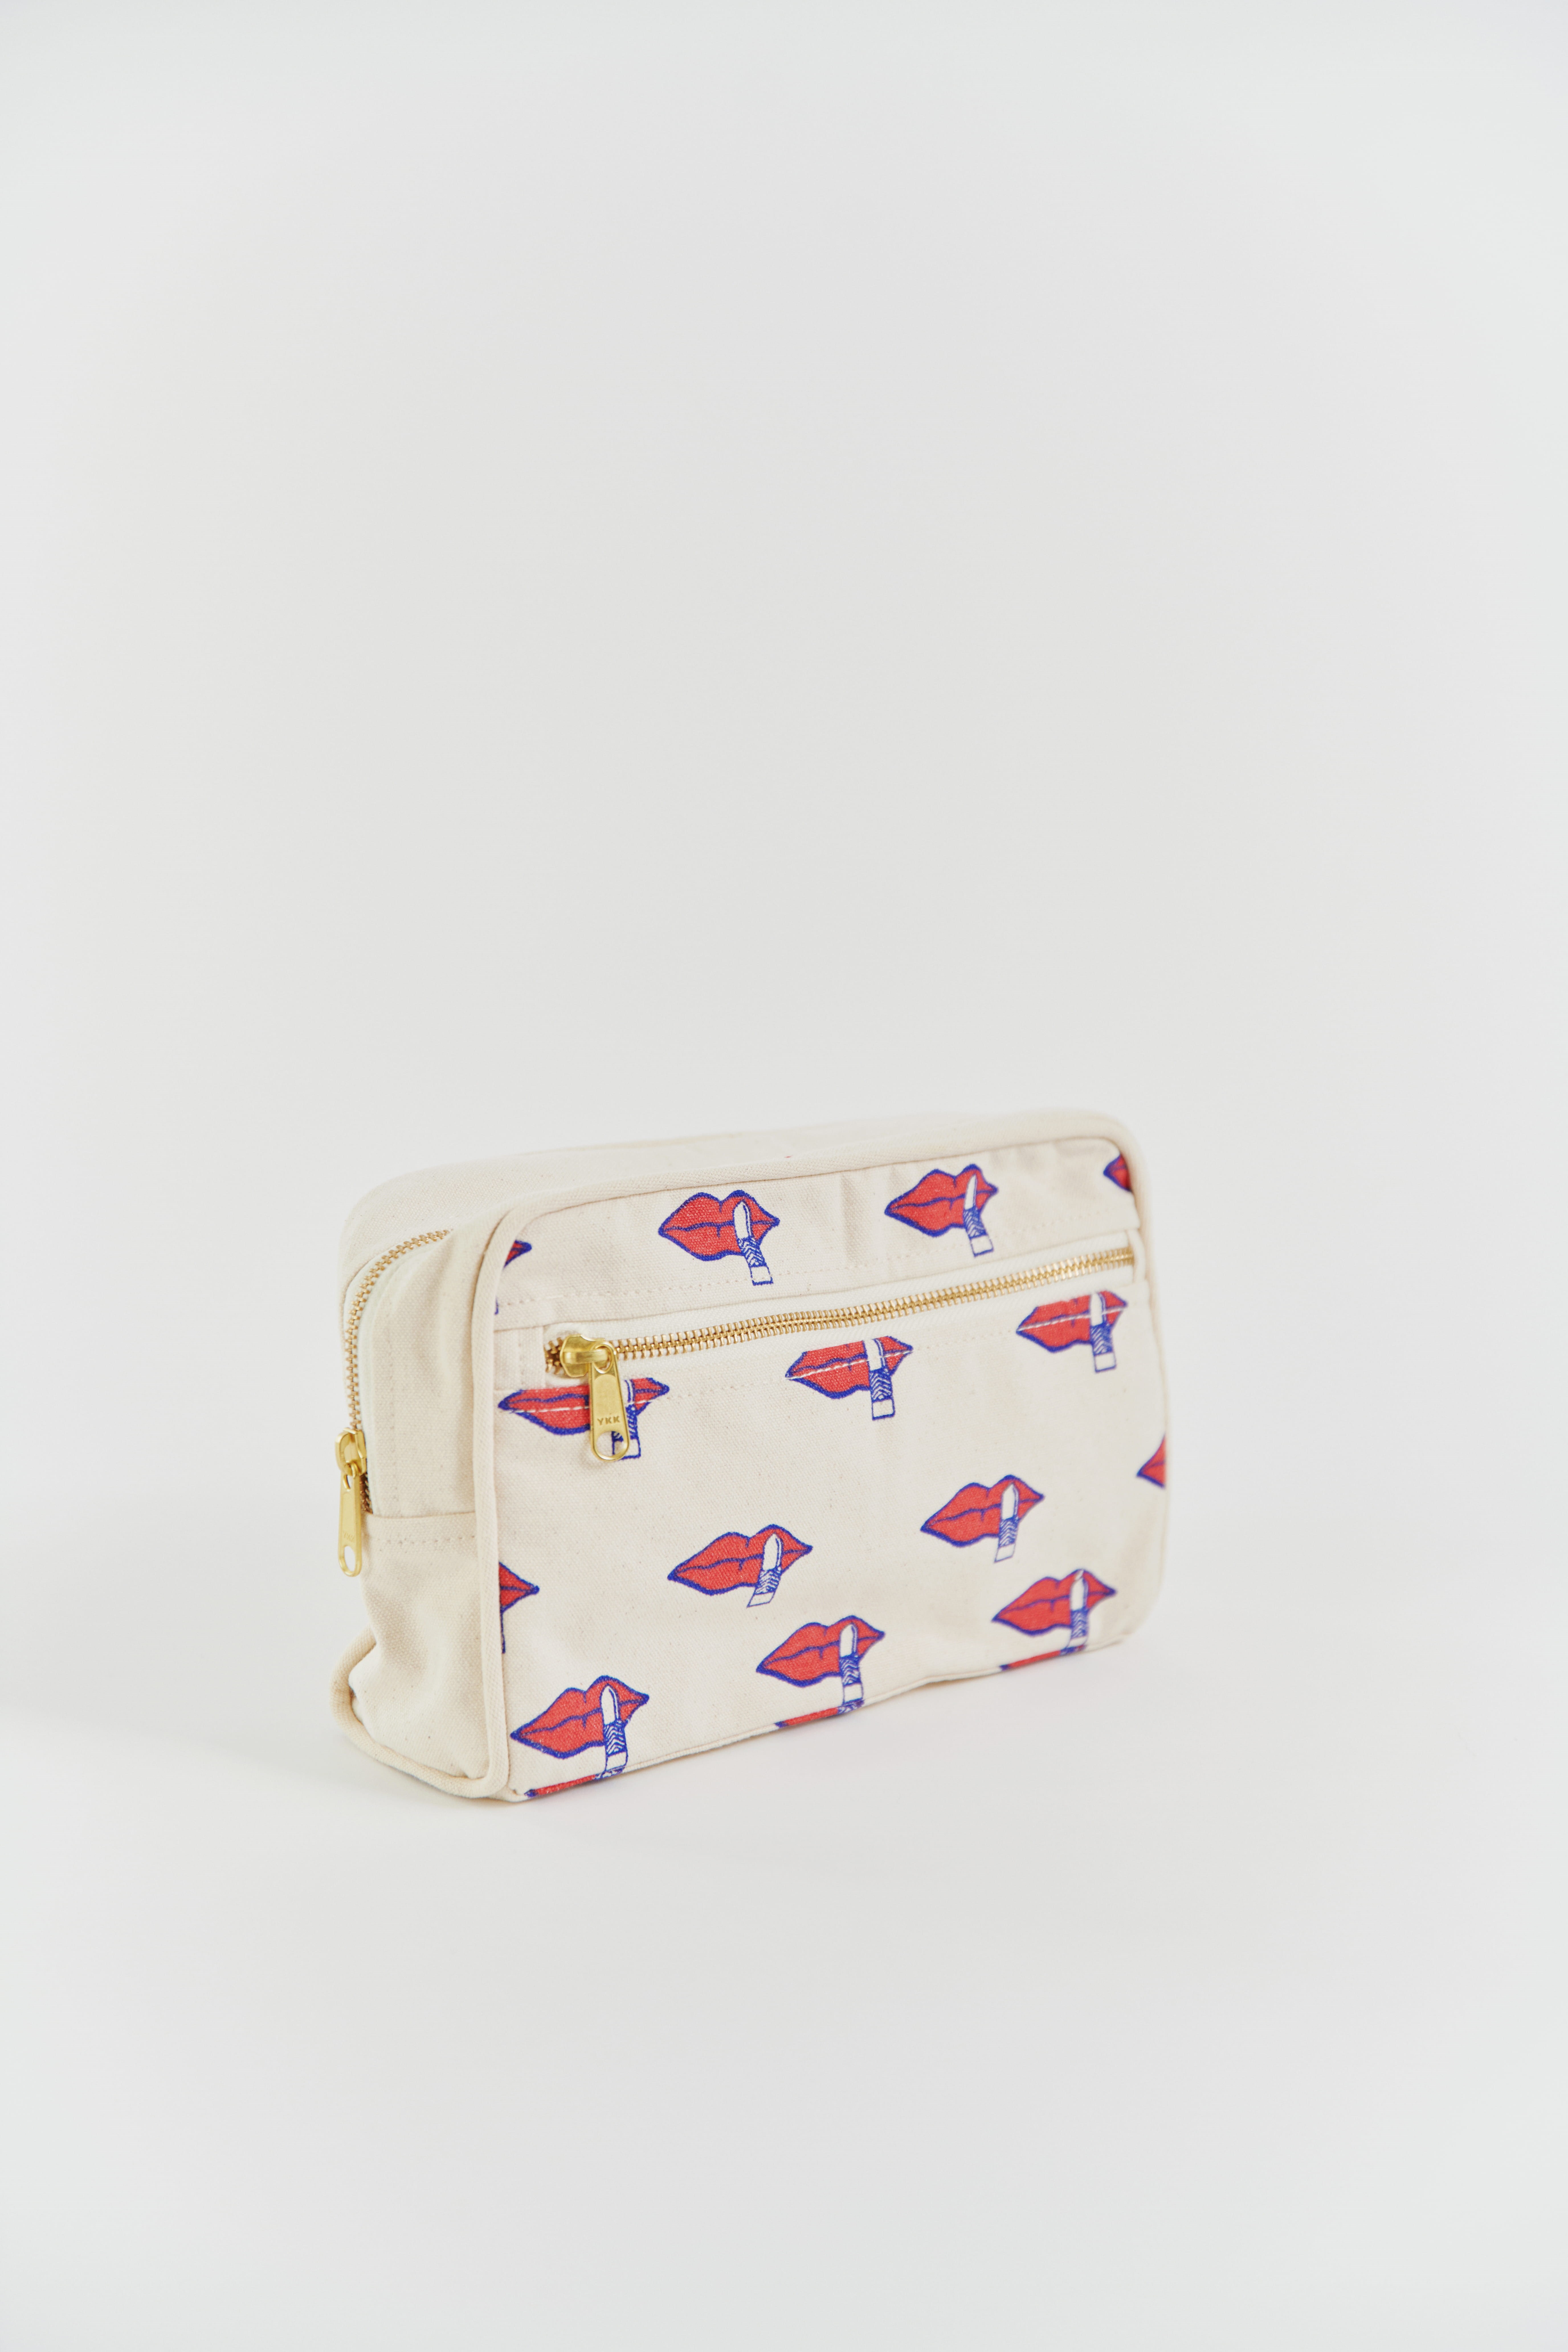 Holly Golightly Toiletry Bag